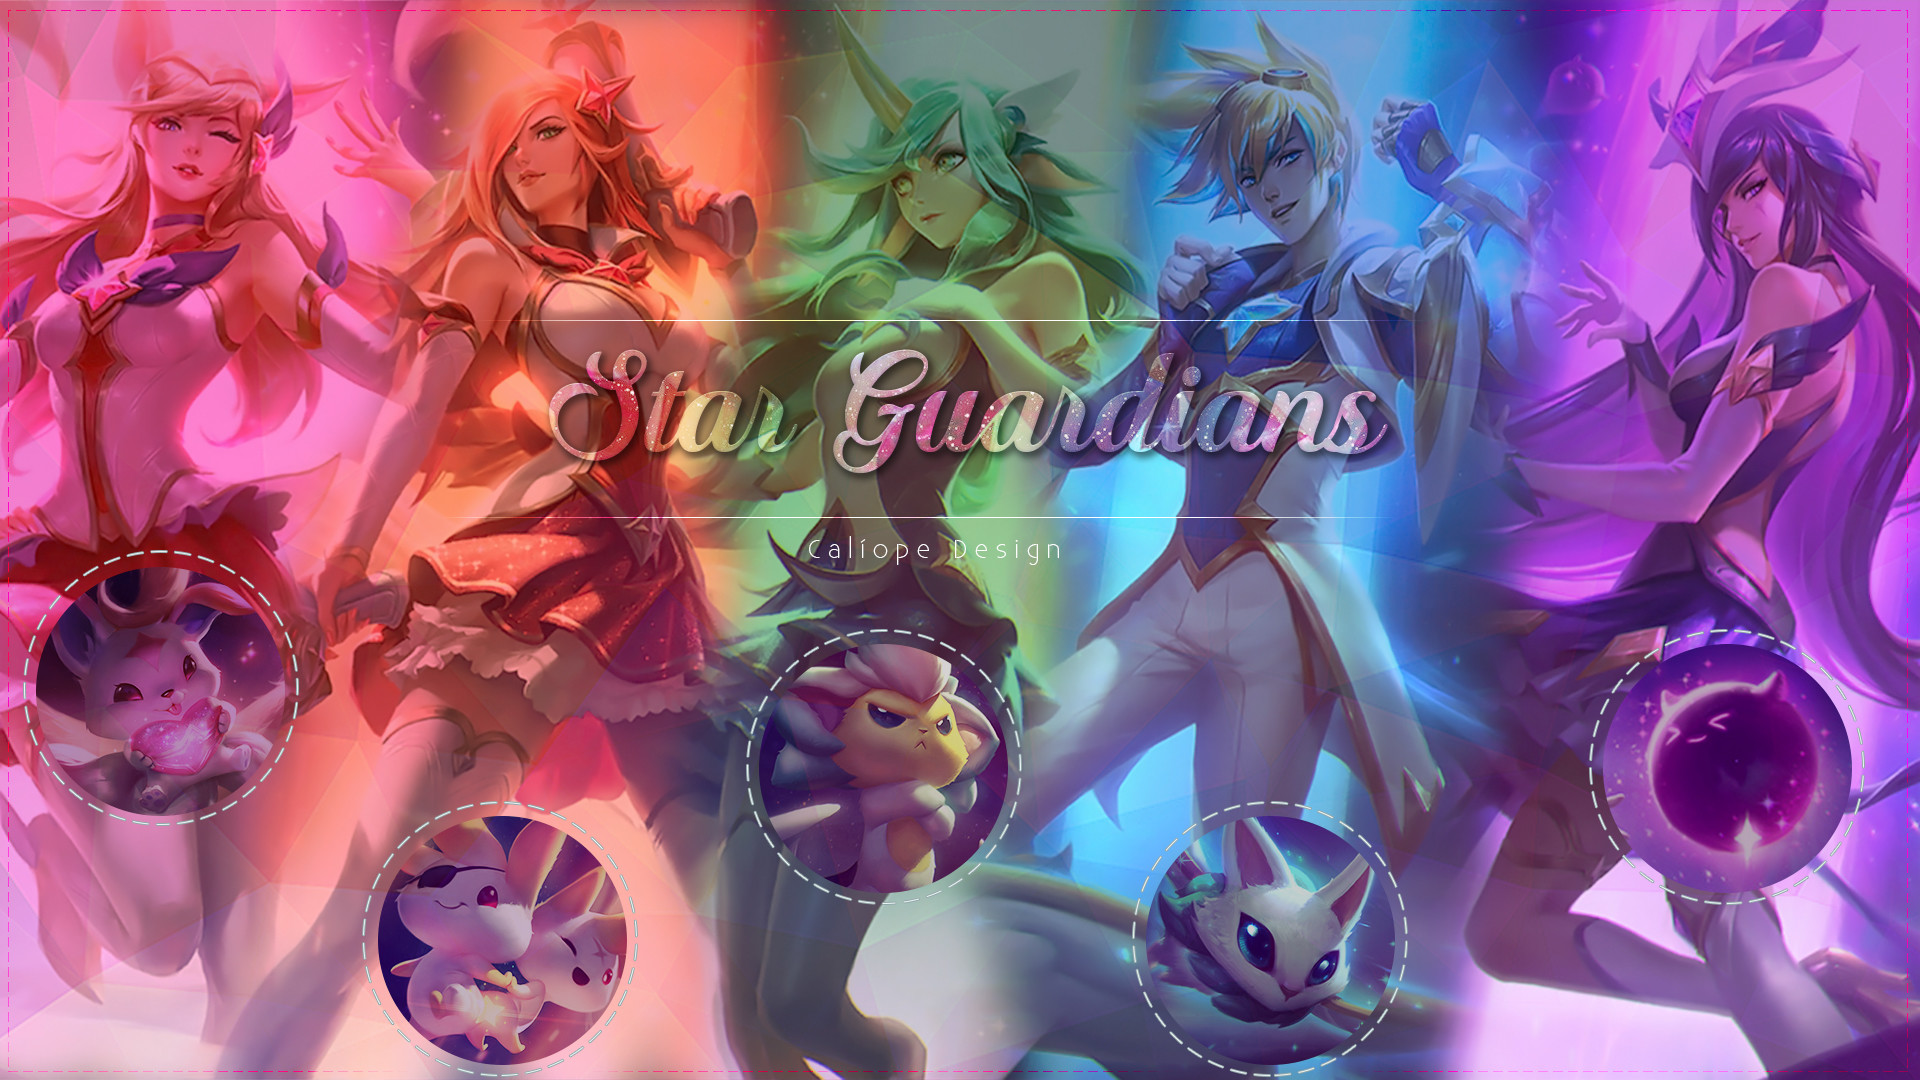 1920x1080 Star Guardians Wallpaper by MissCaliope